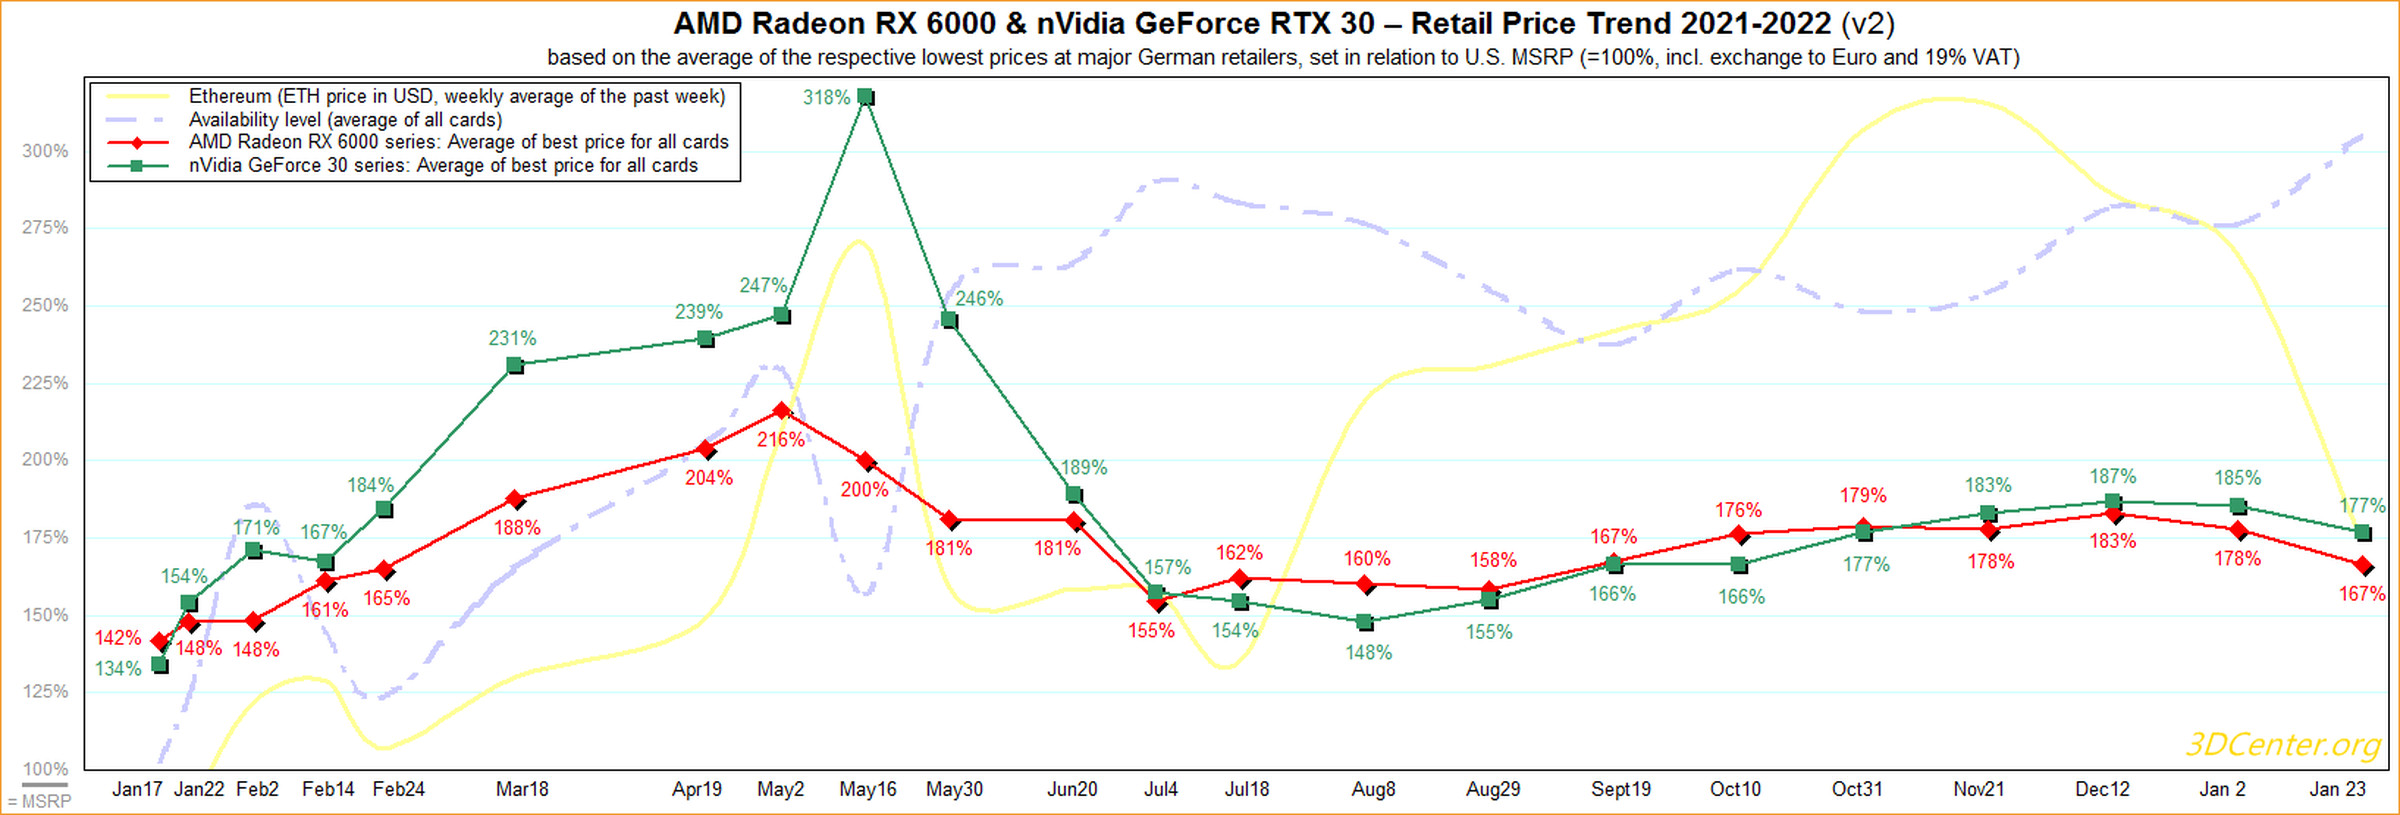 Prices of Nvidia and AMD GPUs have dipped to 177 percent and 167 percent of MSRP respectively, according to this chart.